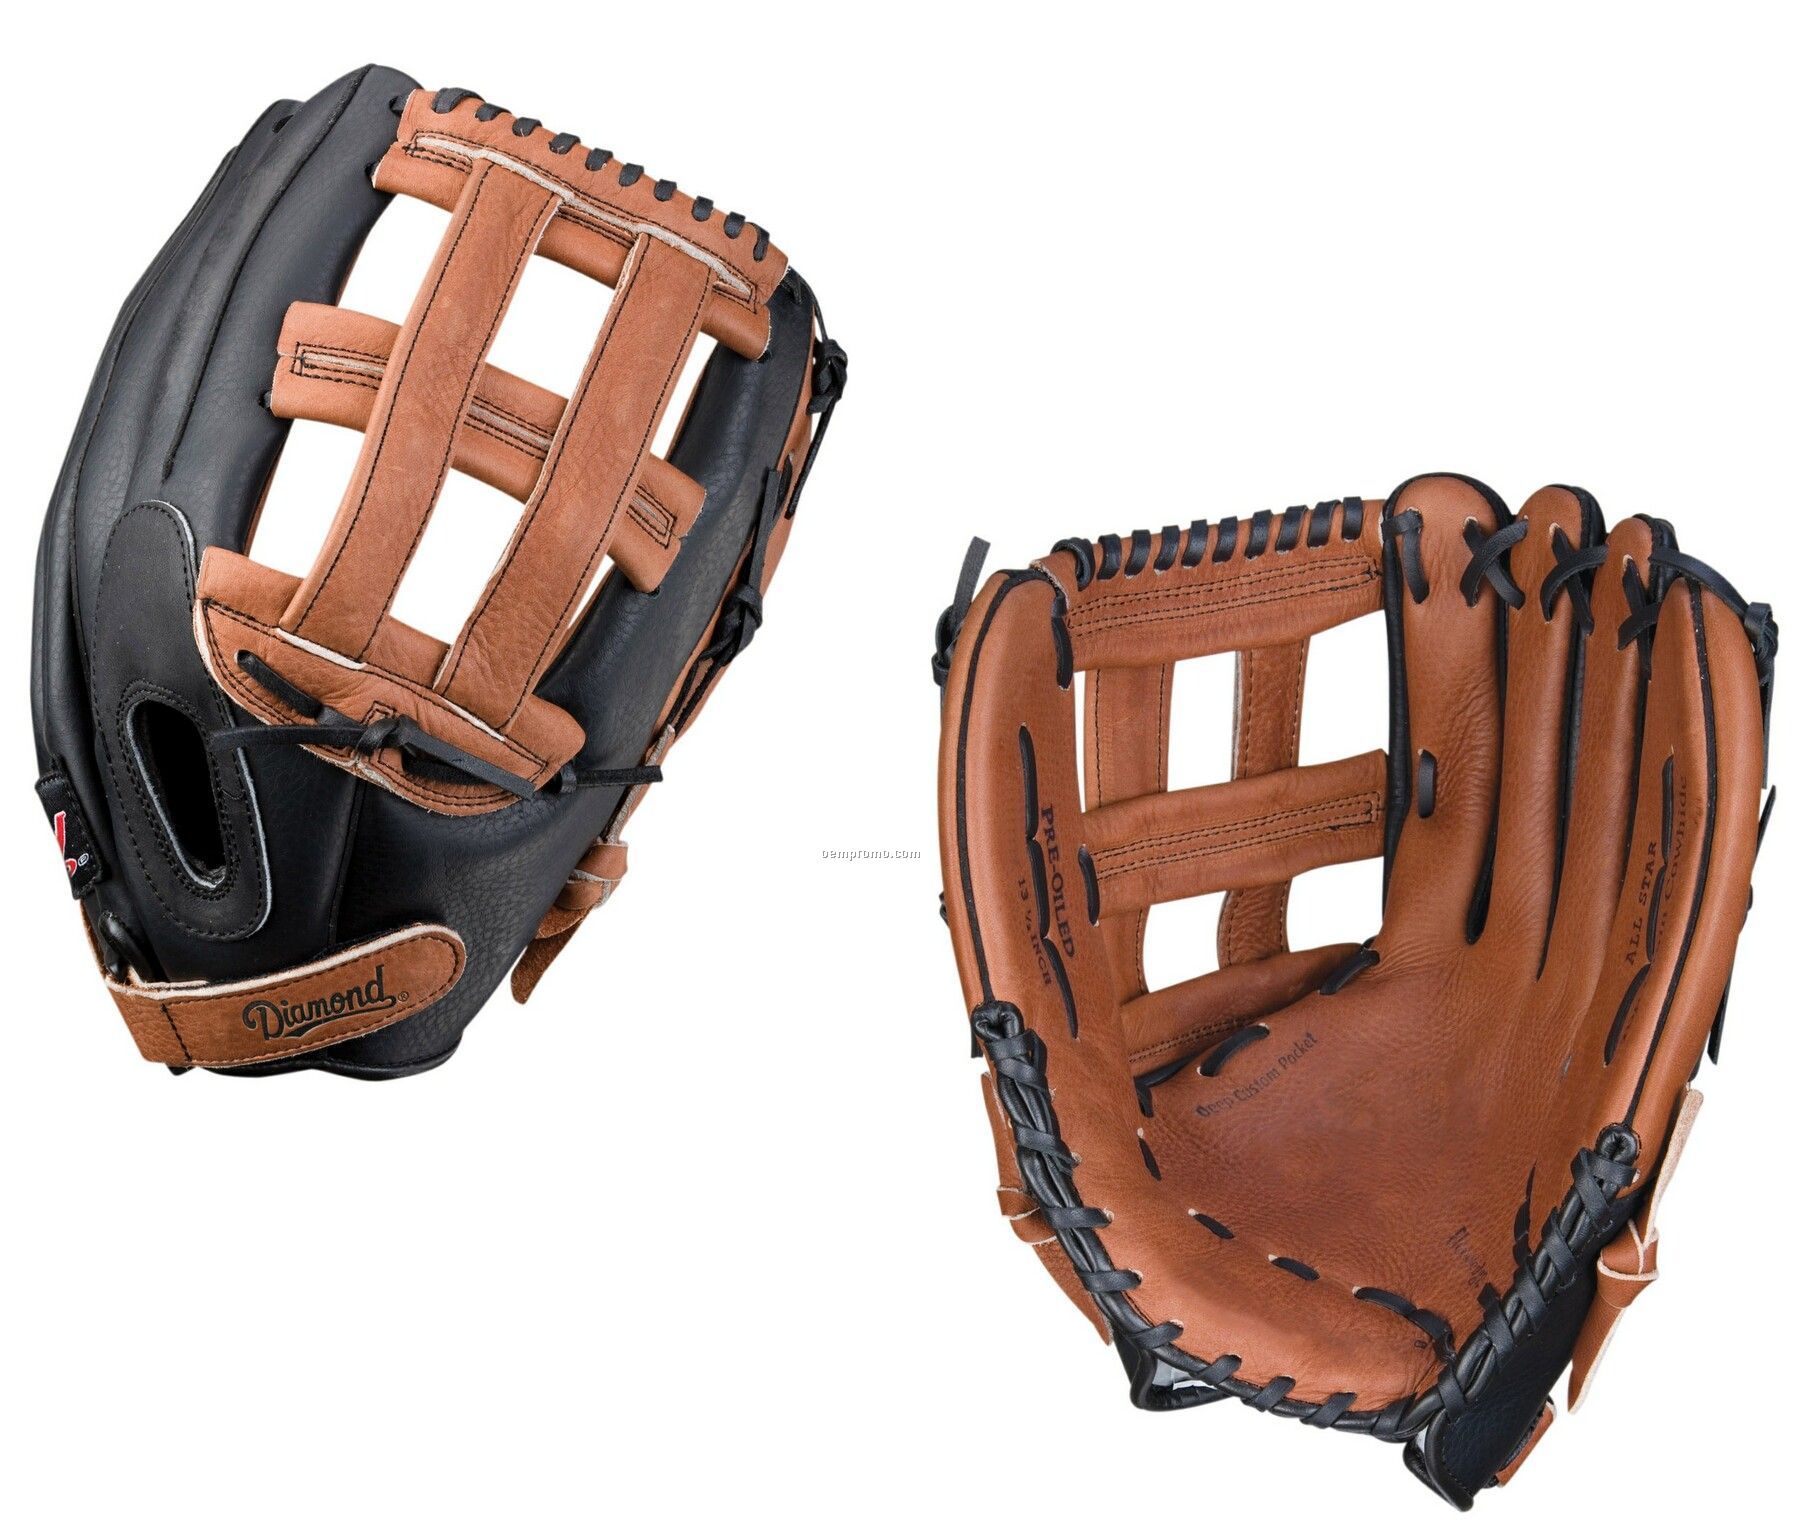 Diamond 13.5" Adult Softball Glove For Right Handed Thrower